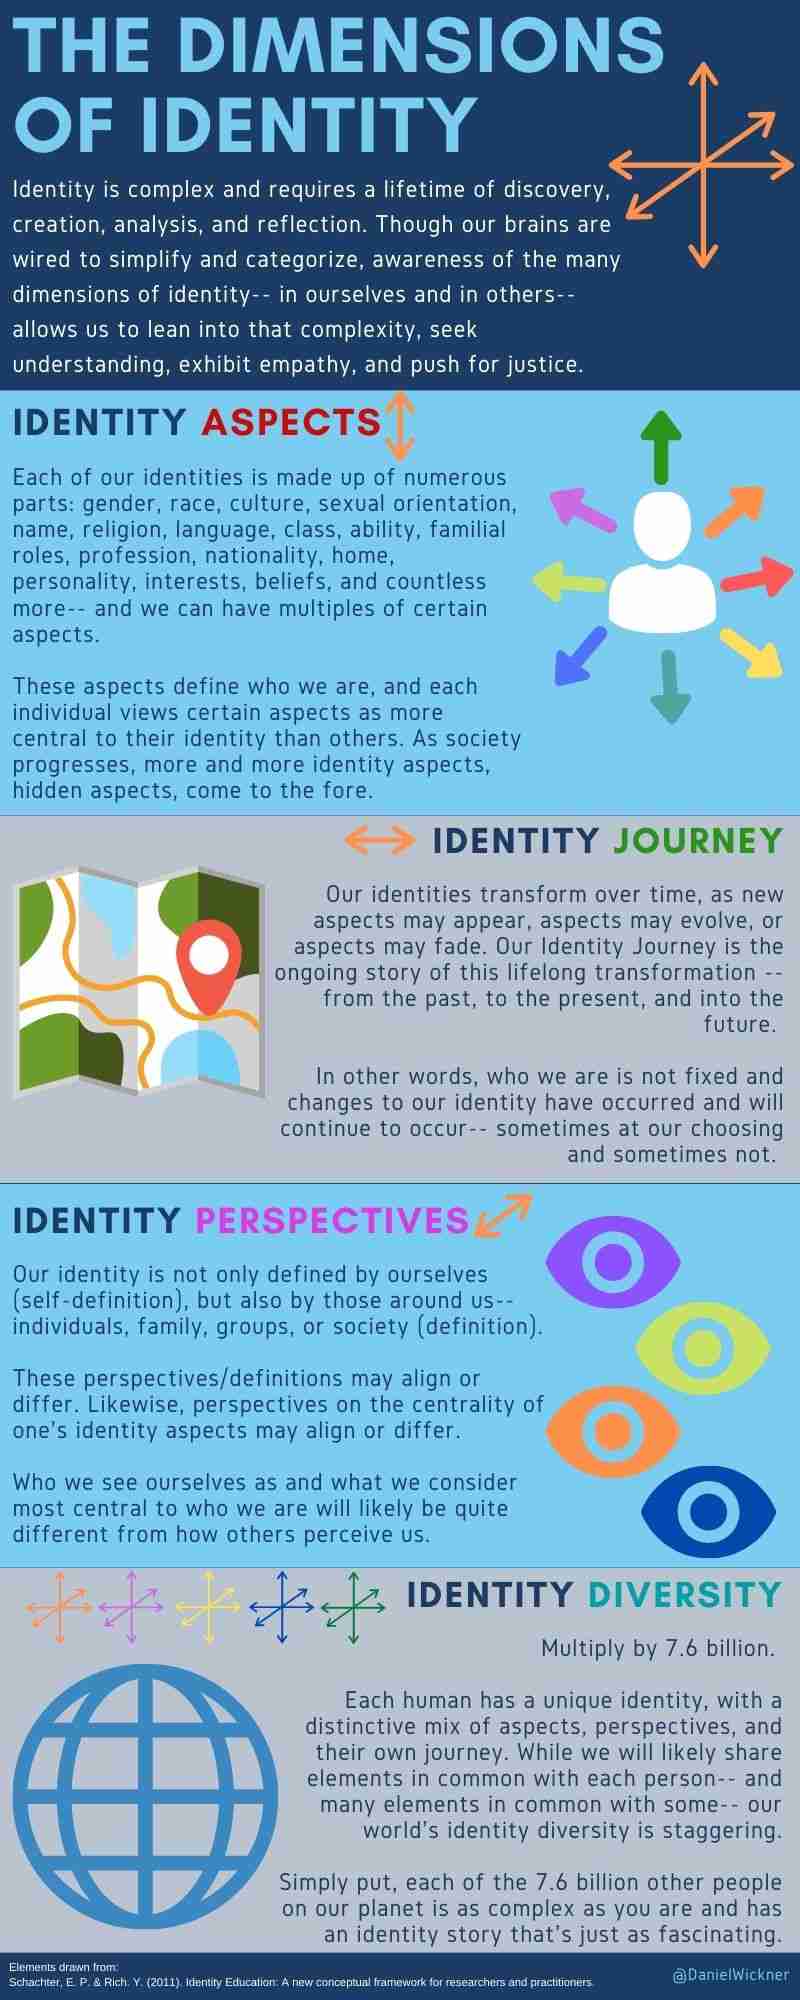 The dimensions of identity